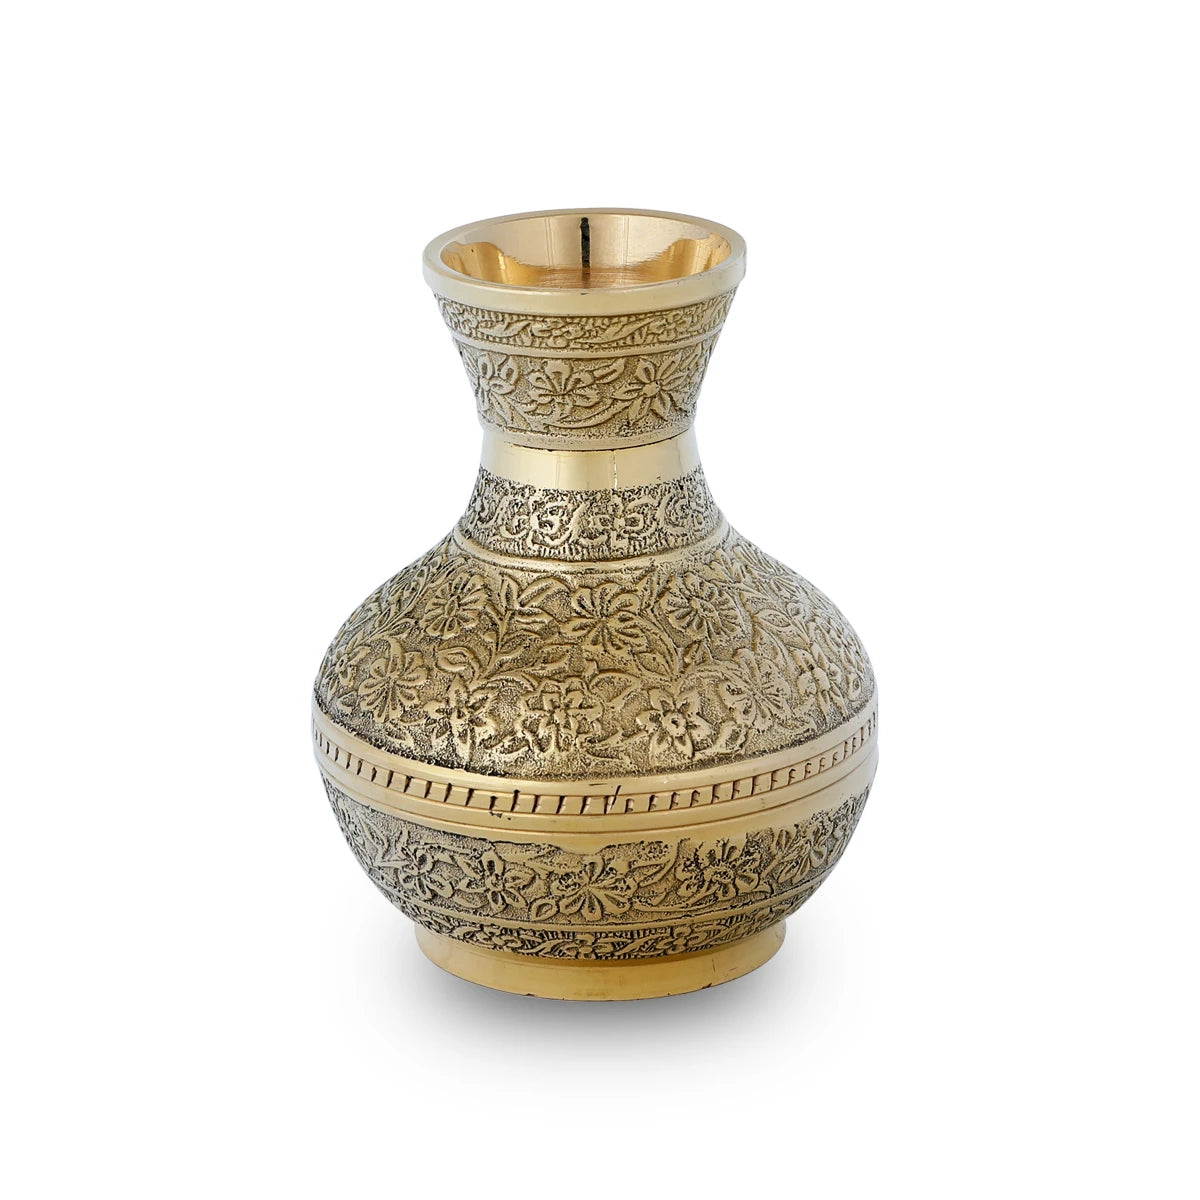 Front View of Golden Colored Metallic Engraved Flower Vase